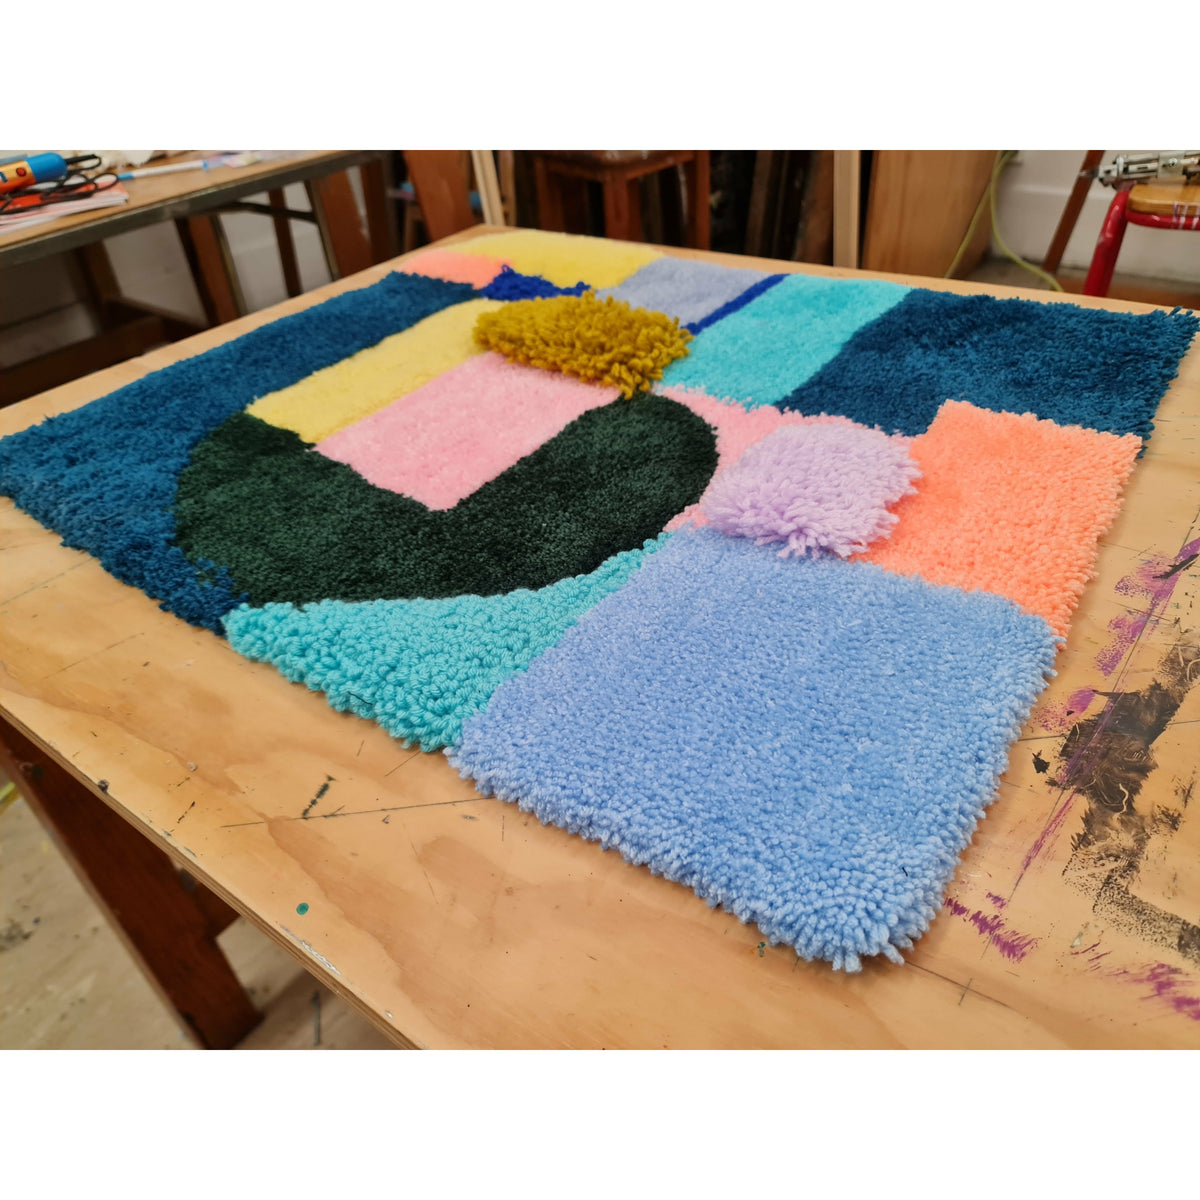 Individual (1 on 1) Christchurch Rug Tufting Workshop at All Things EFFY Headquarters - Choose your day and time!